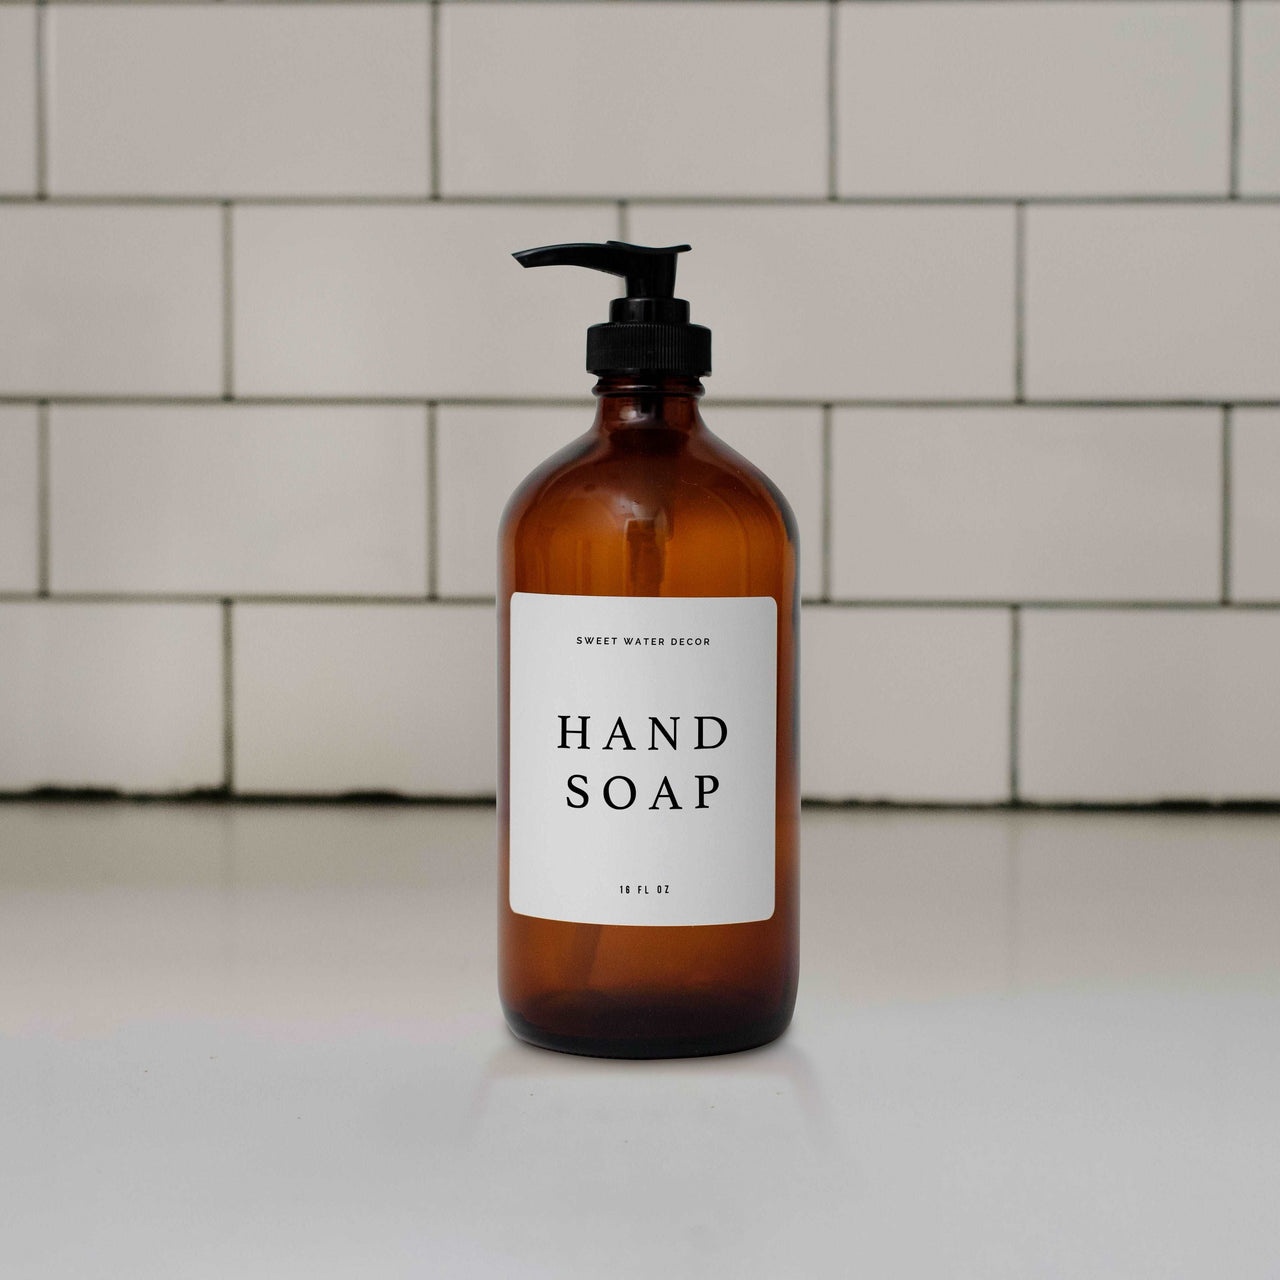 16oz Amber Glass Hand Soap Dispenser - White Text Label Tony's Home Furnishings Furniture. Beds. Dressers. Sofas.